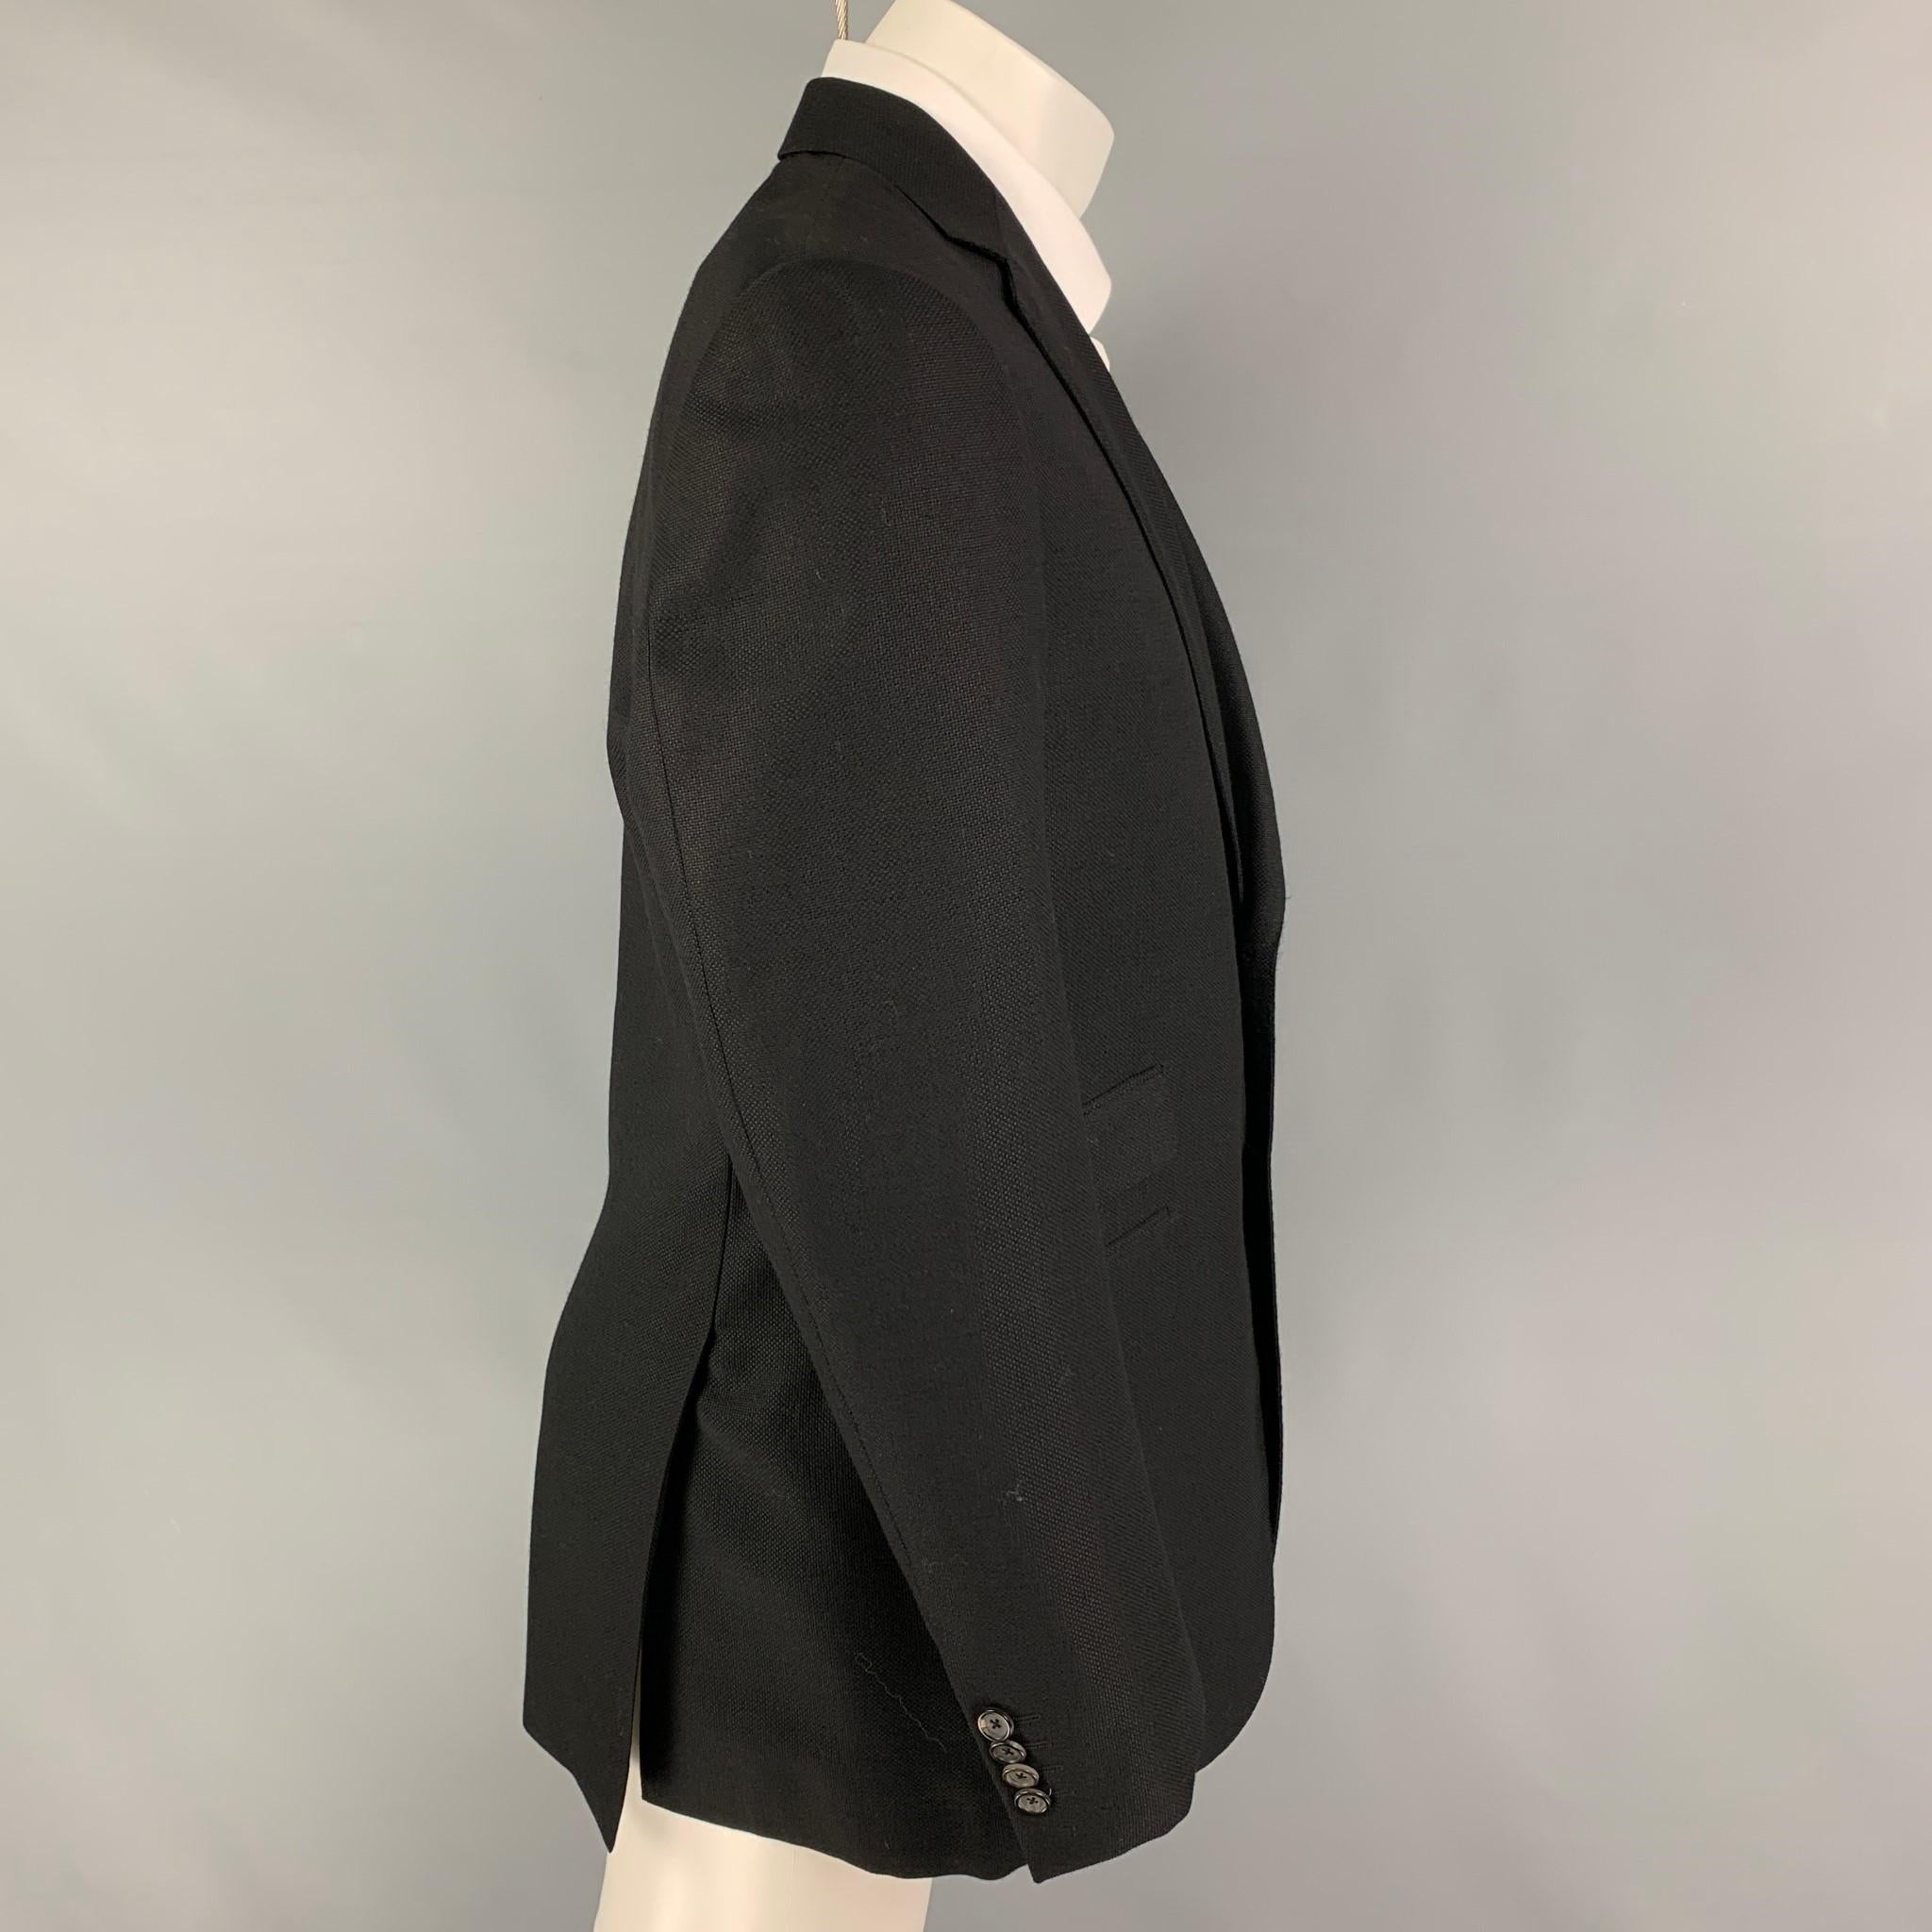 PAL ZILERI sport coat comes in a black textured wool with a full liner featuring a notch lapel, flap pockets, double back vent, and a double button closure. Made in Italy. 

Very Good Pre-Owned Condition.
Marked: 50

Measurements:

Shoulder: 18